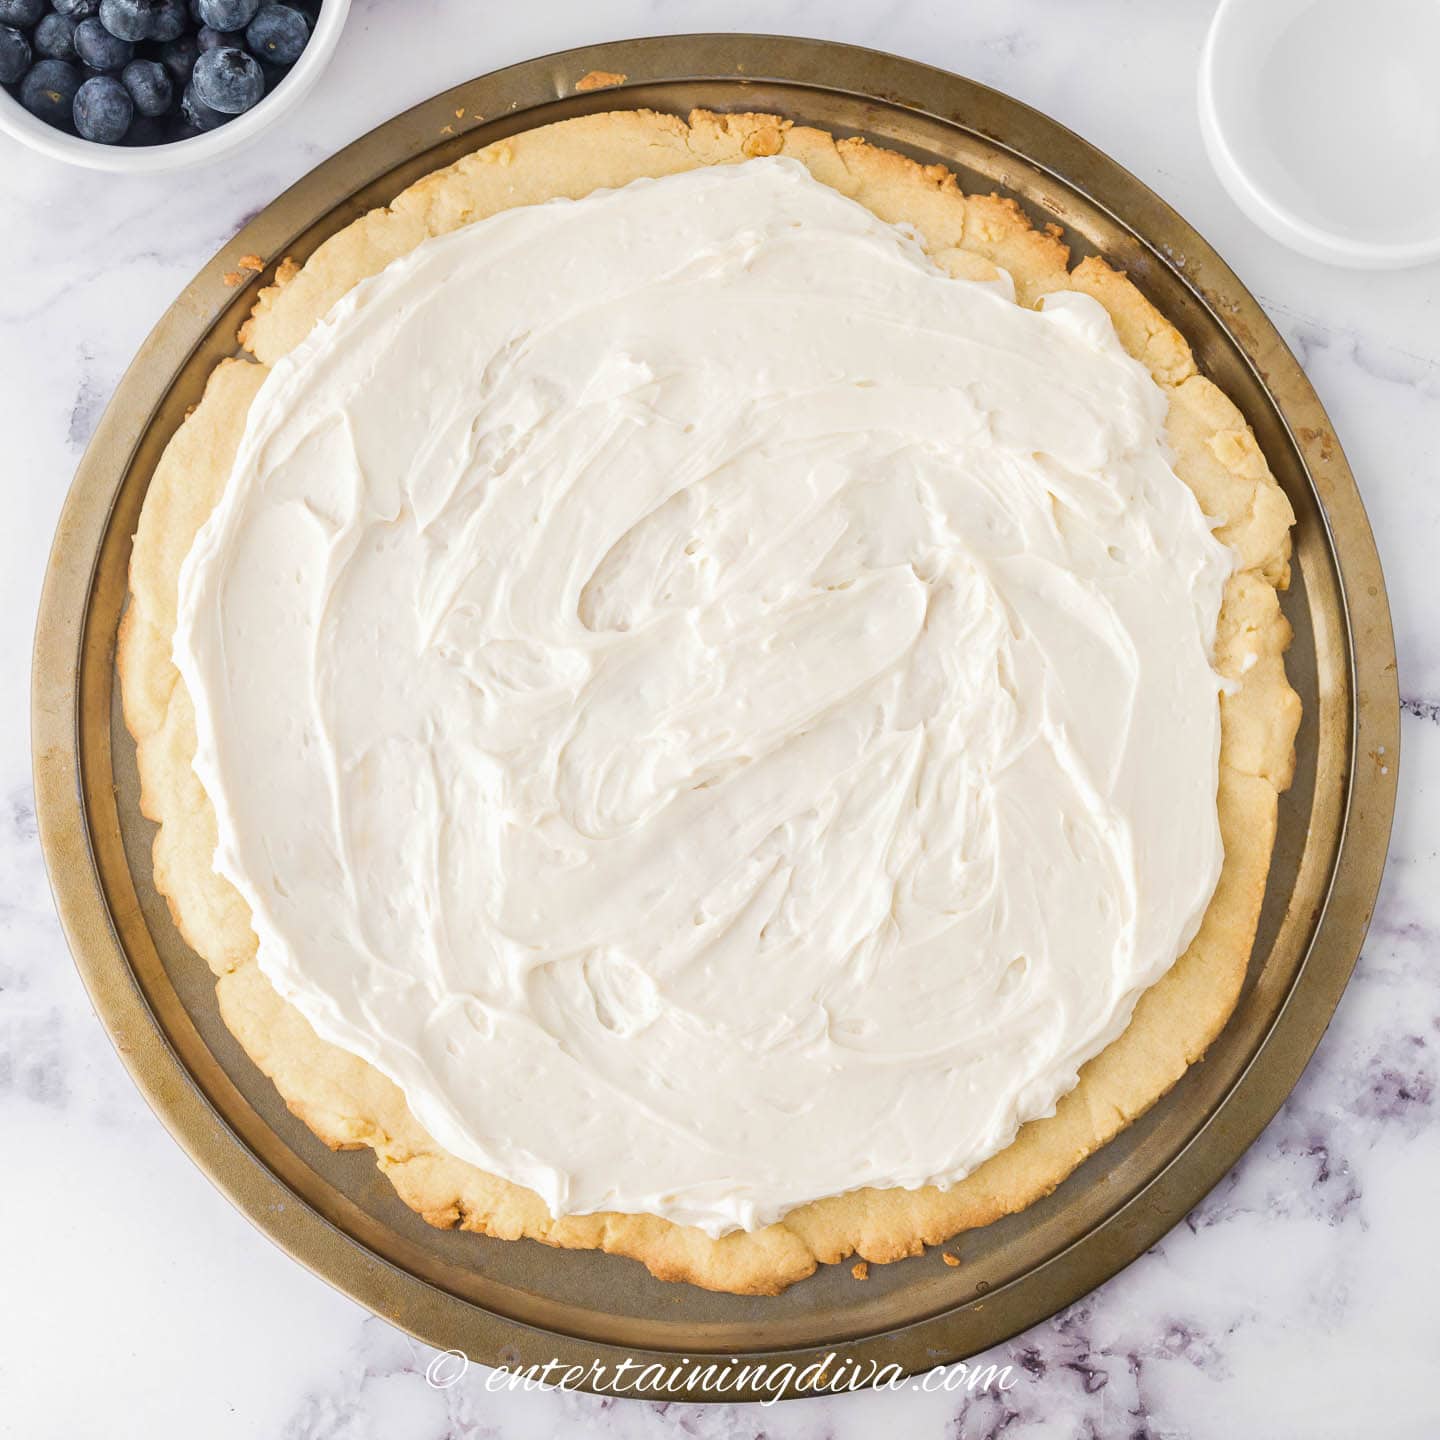 Cream cheese frosting spread on top of a sugar cookie crust